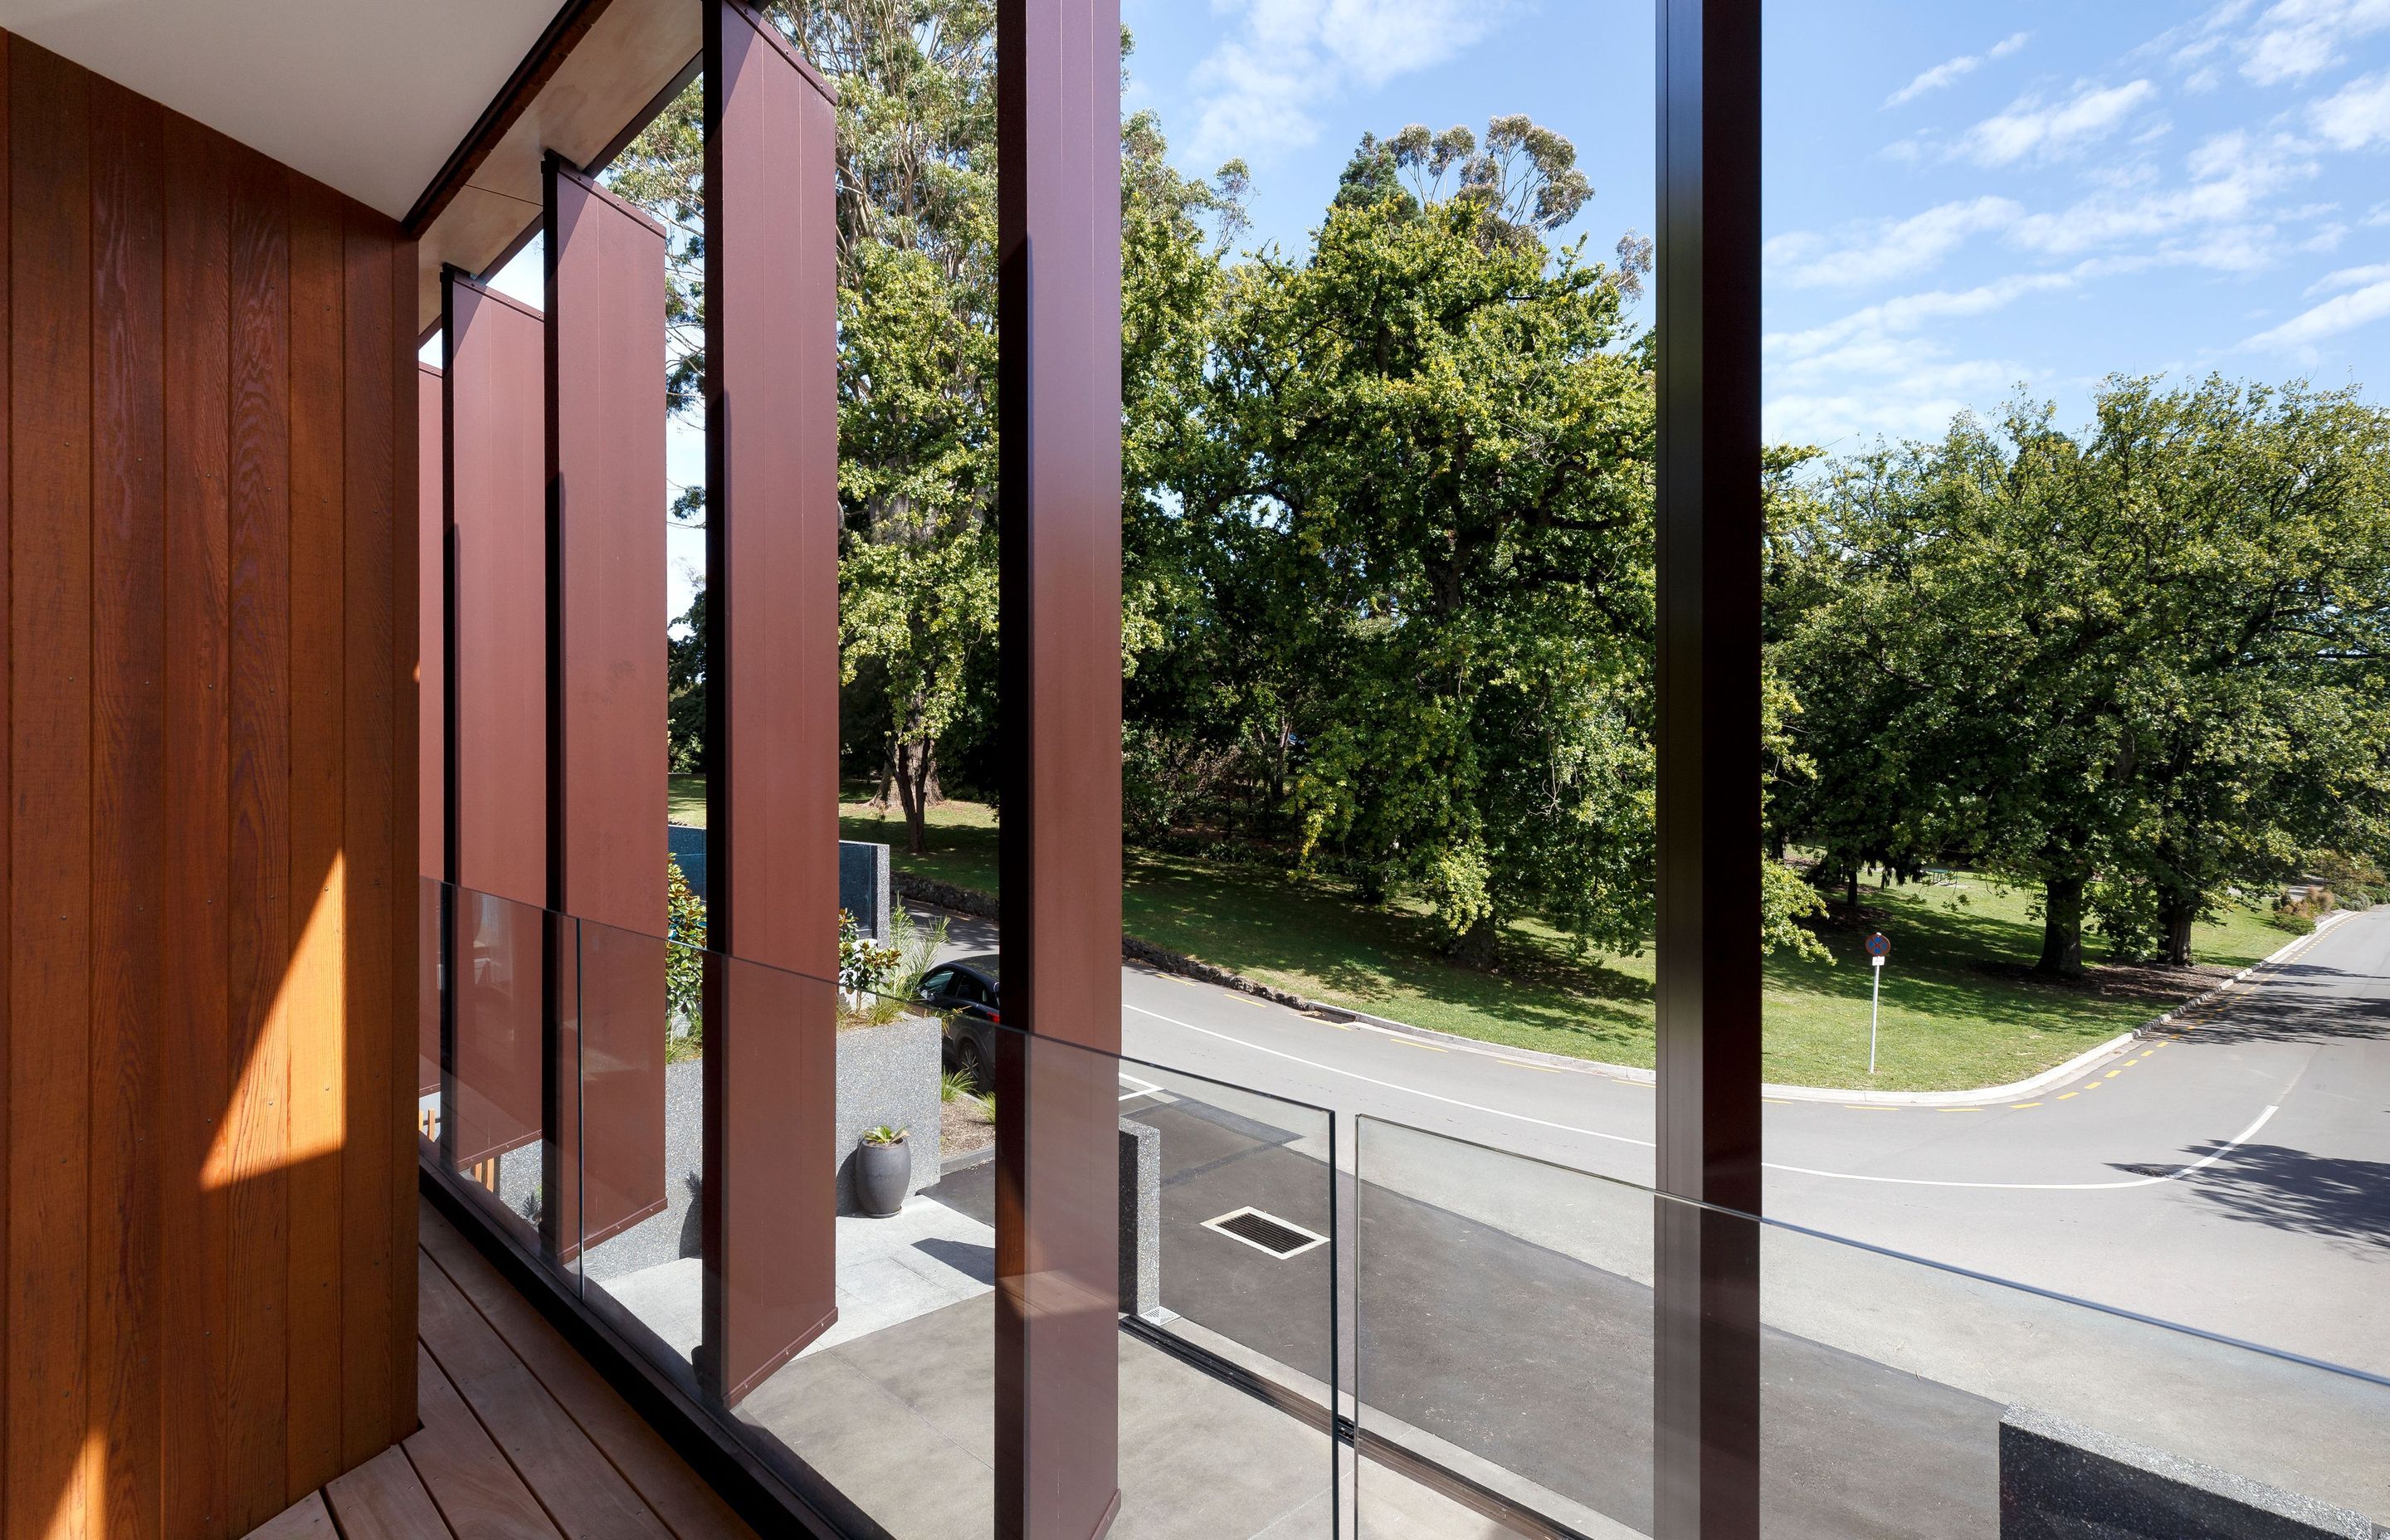  The fixed aluminium louvres provide screening for sun and privacy, and direct views towards the open space greenery